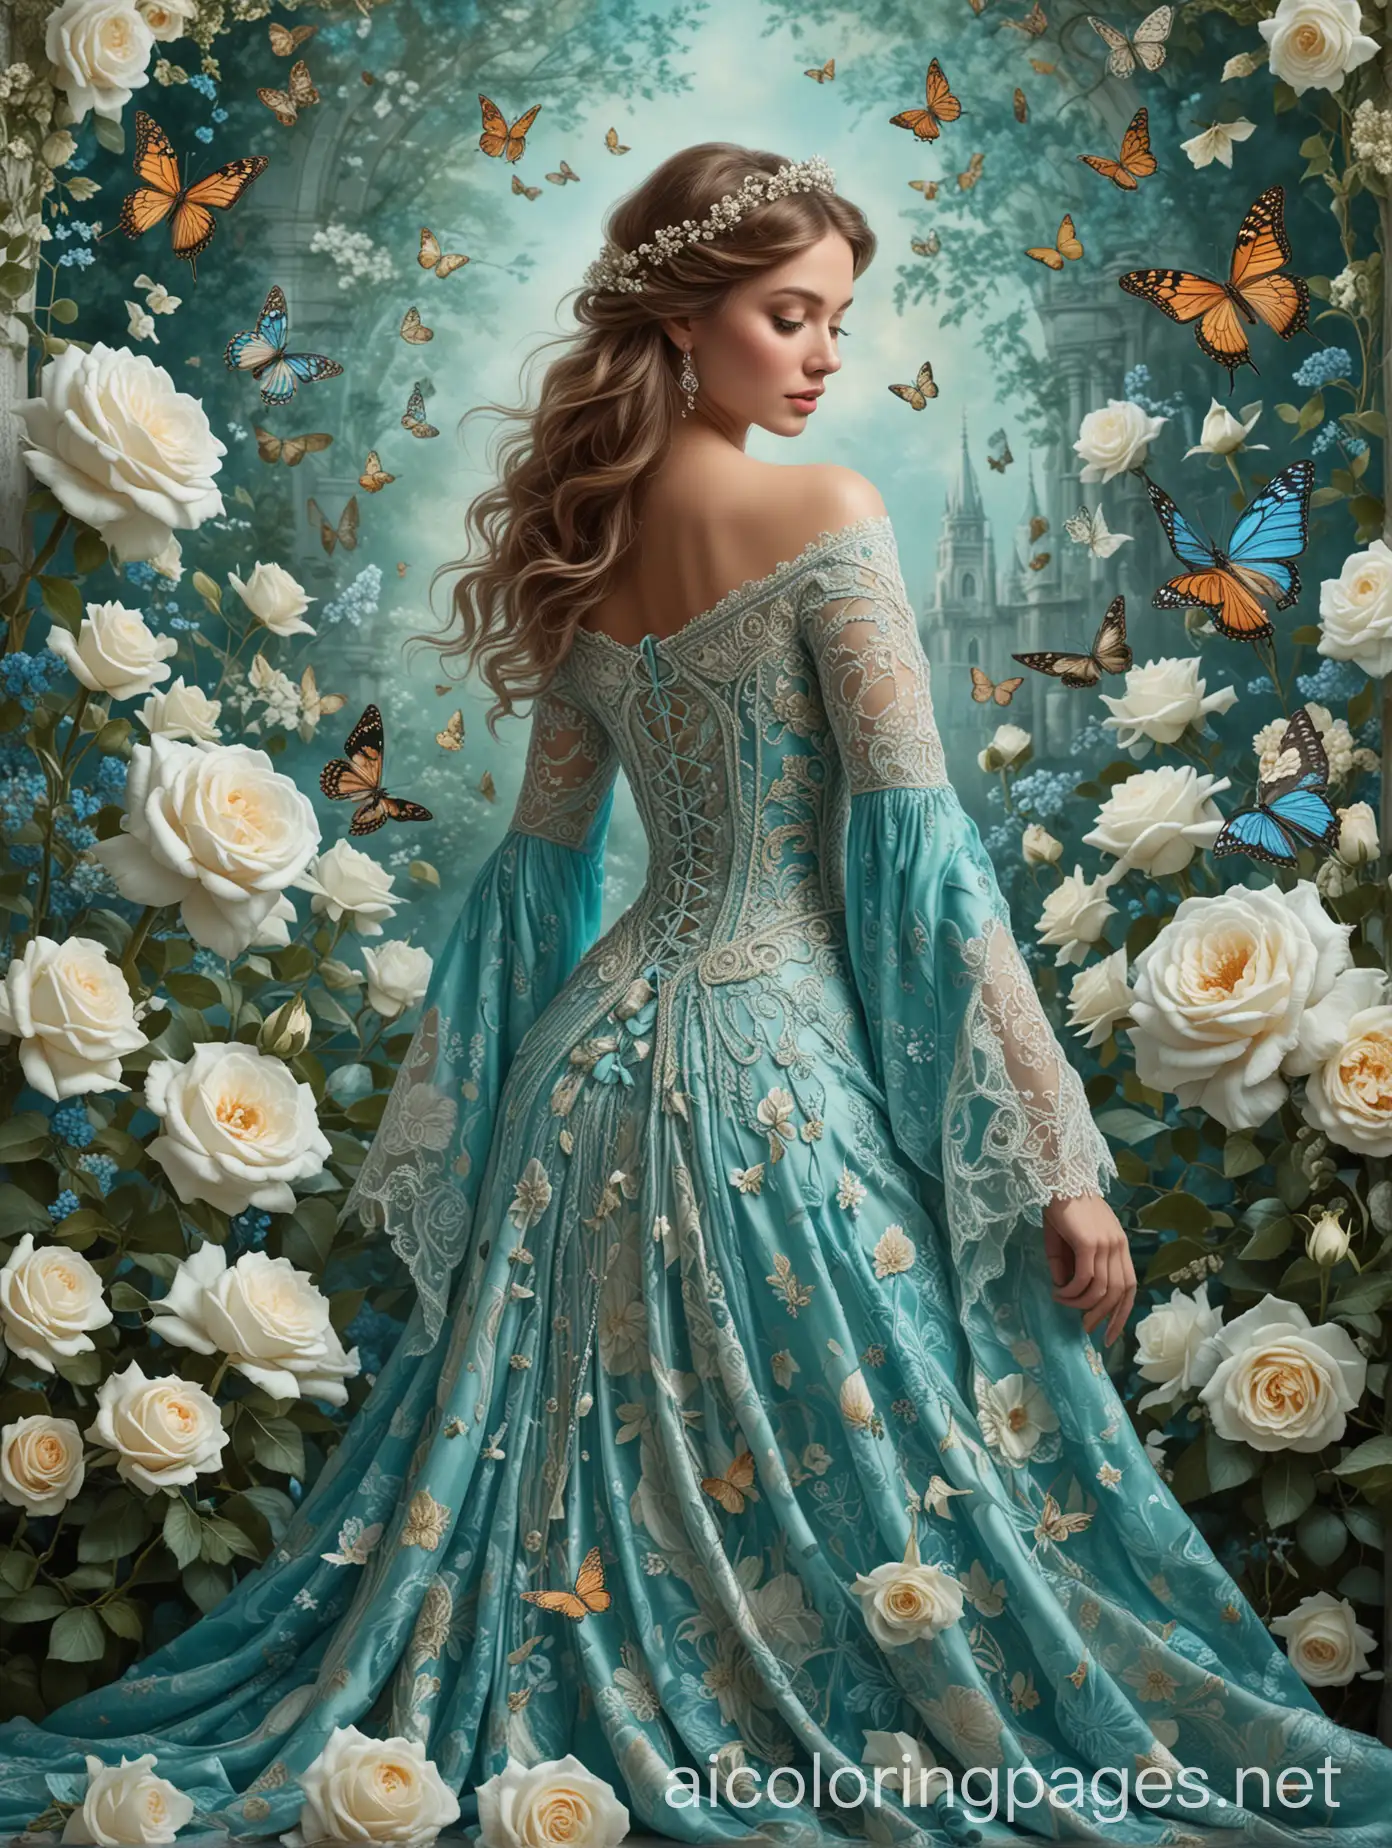 Elegant-Woman-Surrounded-by-Turquoise-Roses-and-Butterflies